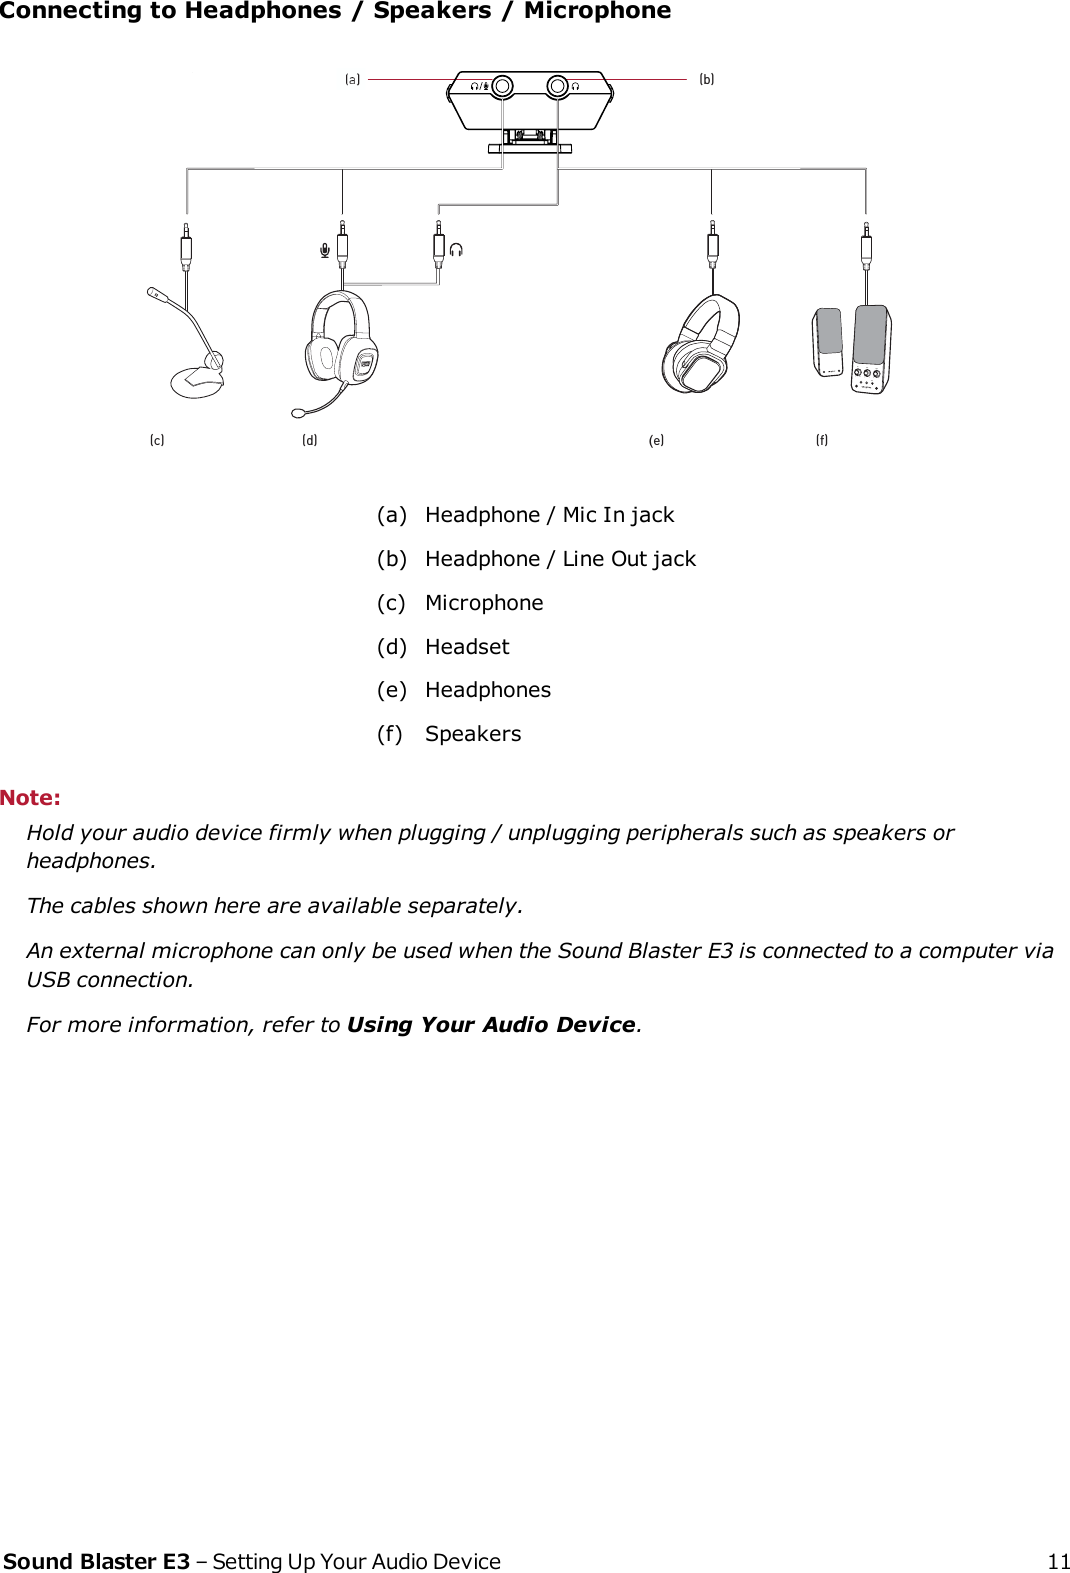 Connecting to Headphones / Speakers / MicrophoneBASS TREBLEOFFAUXINMAXVOLUMEa(a) (b)(c) (d) (e) (f)(a) Headphone / Mic In jack(b) Headphone / Line Out jack(c) Microphone(d) Headset(e) Headphones(f) SpeakersNote:Hold your audio device firmly when plugging / unplugging peripherals such as speakers orheadphones.The cables shown here are available separately.An external microphone can only be used when the Sound Blaster E3 is connected to a computer viaUSB connection.For more information, refer to Using Your Audio Device.Sound Blaster E3 – Setting Up Your Audio Device 11